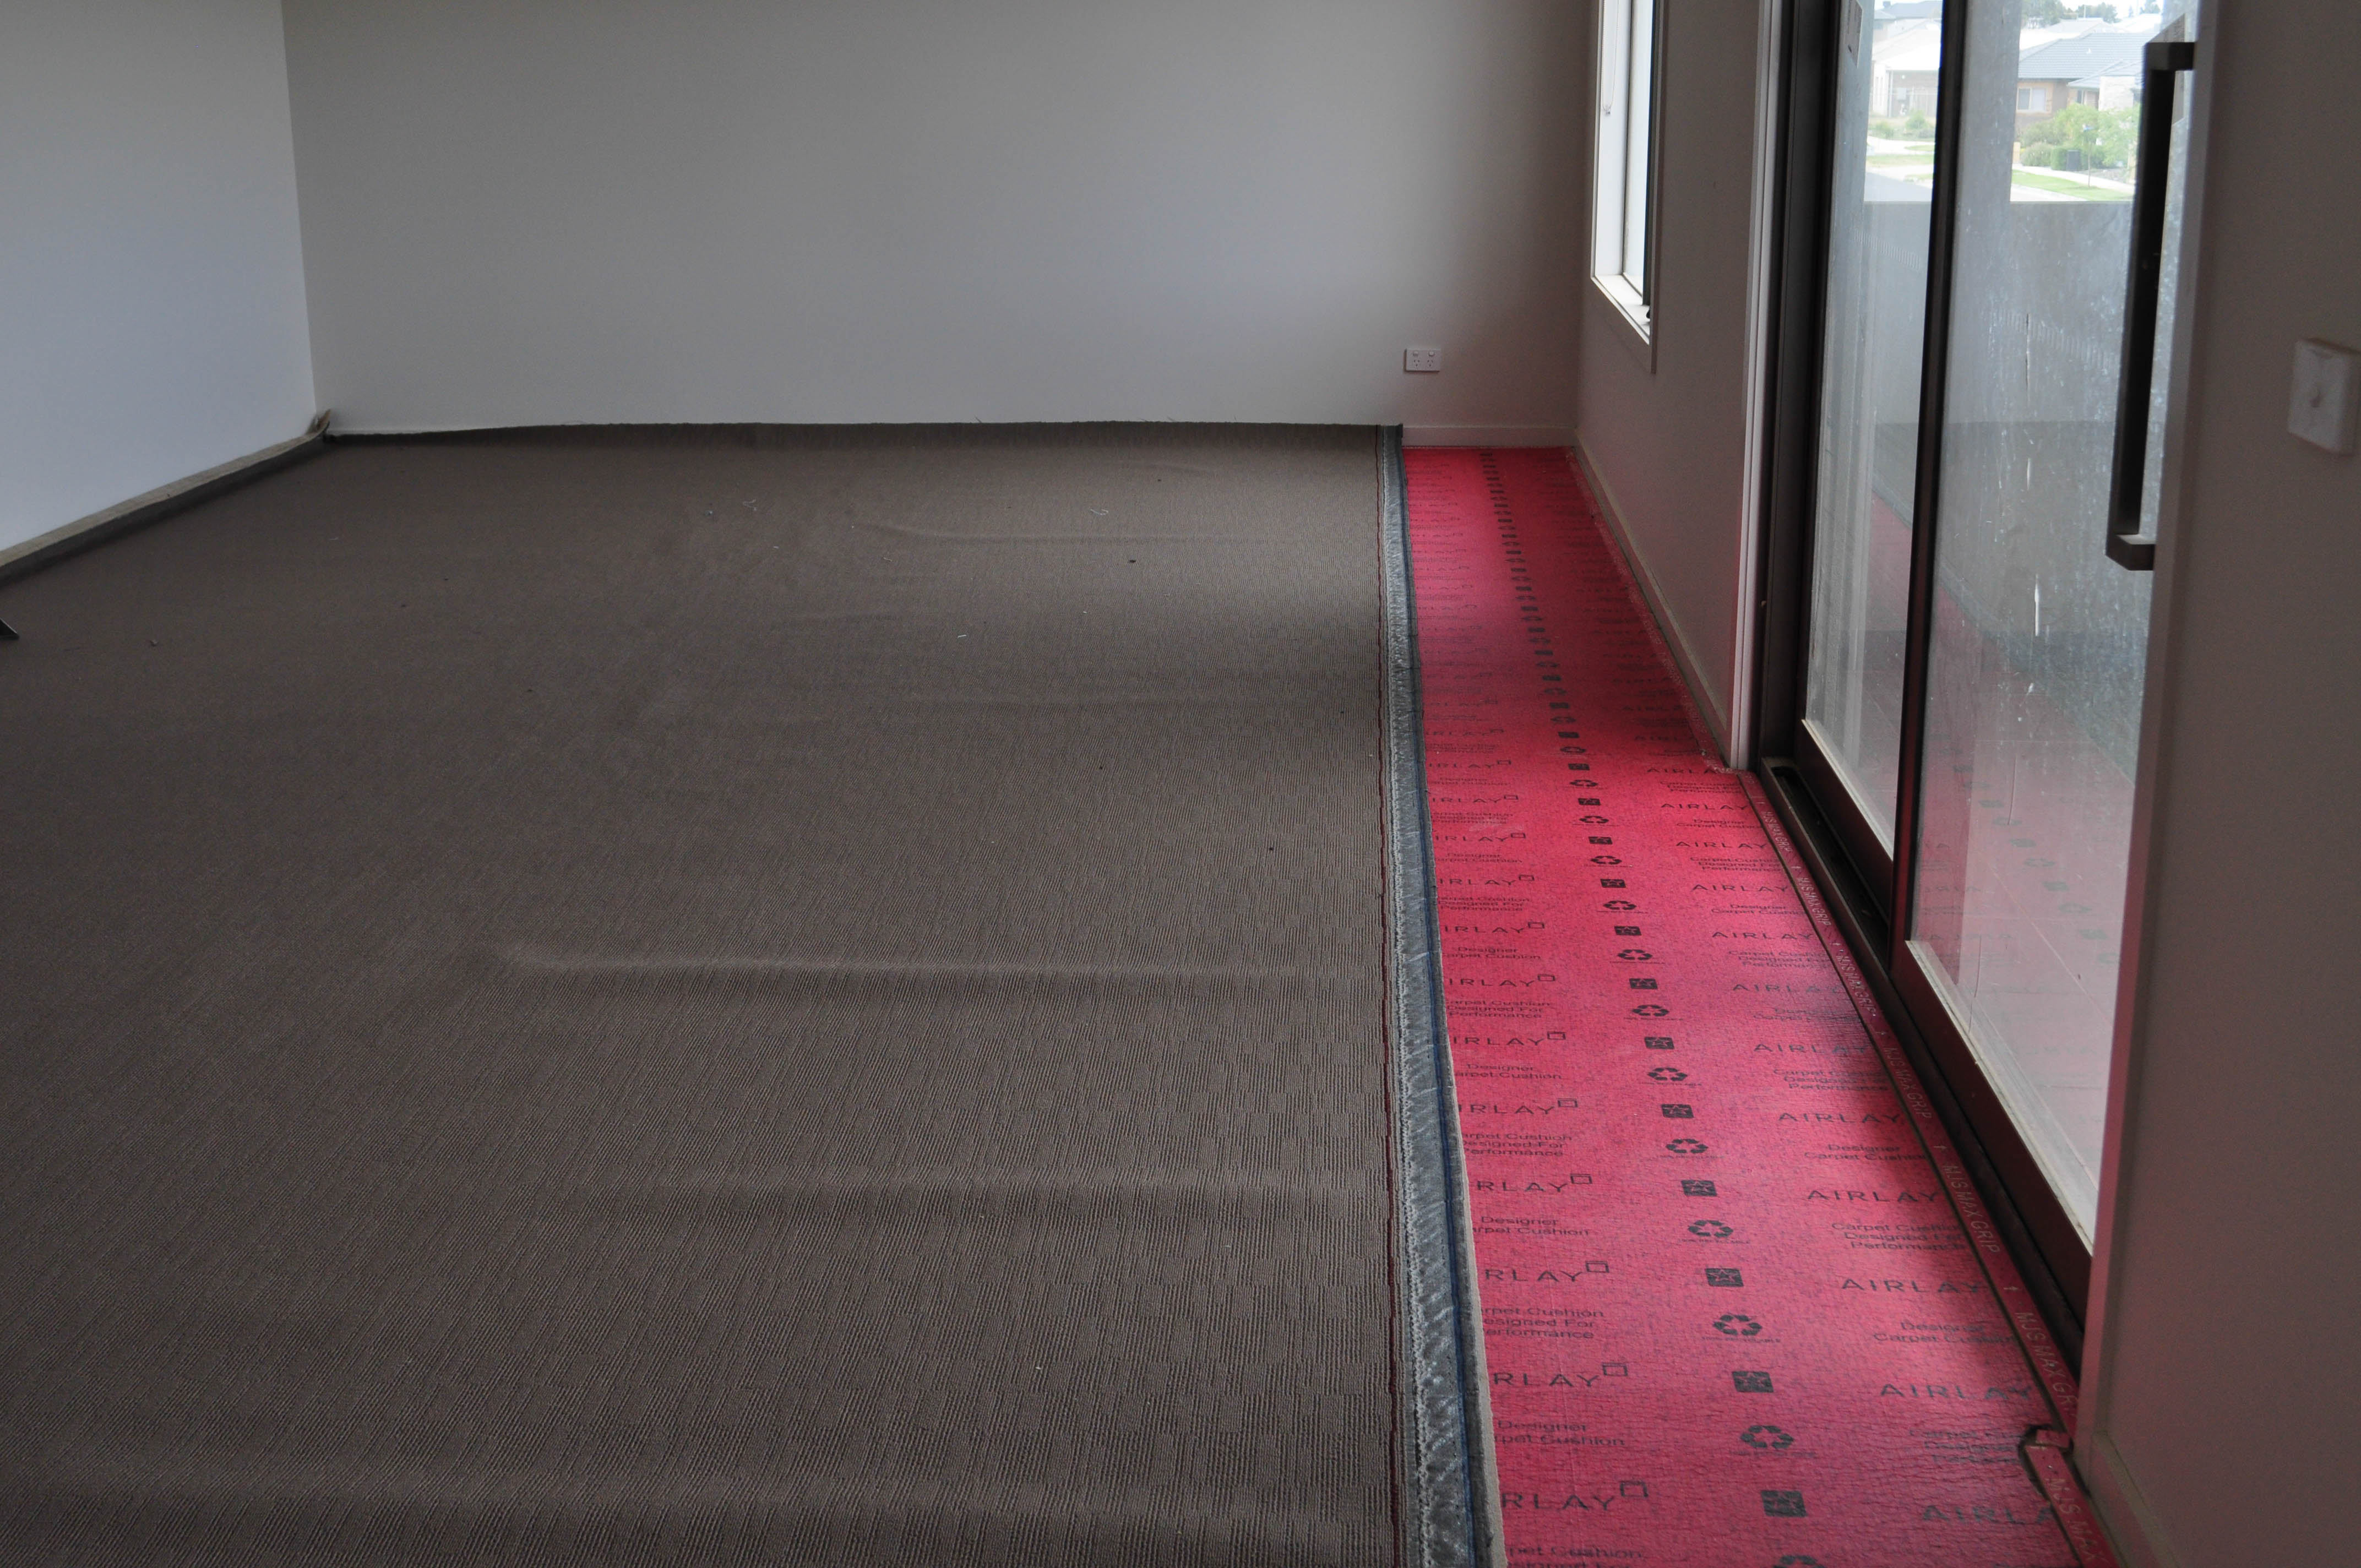 carpet laying process under way by Concord Floors in a home in Werribee, where pattern matching is required, showing a roll of carpet in a room, stretched out, on top of installed red underlay in a home in
 Point Cook, Werribee.